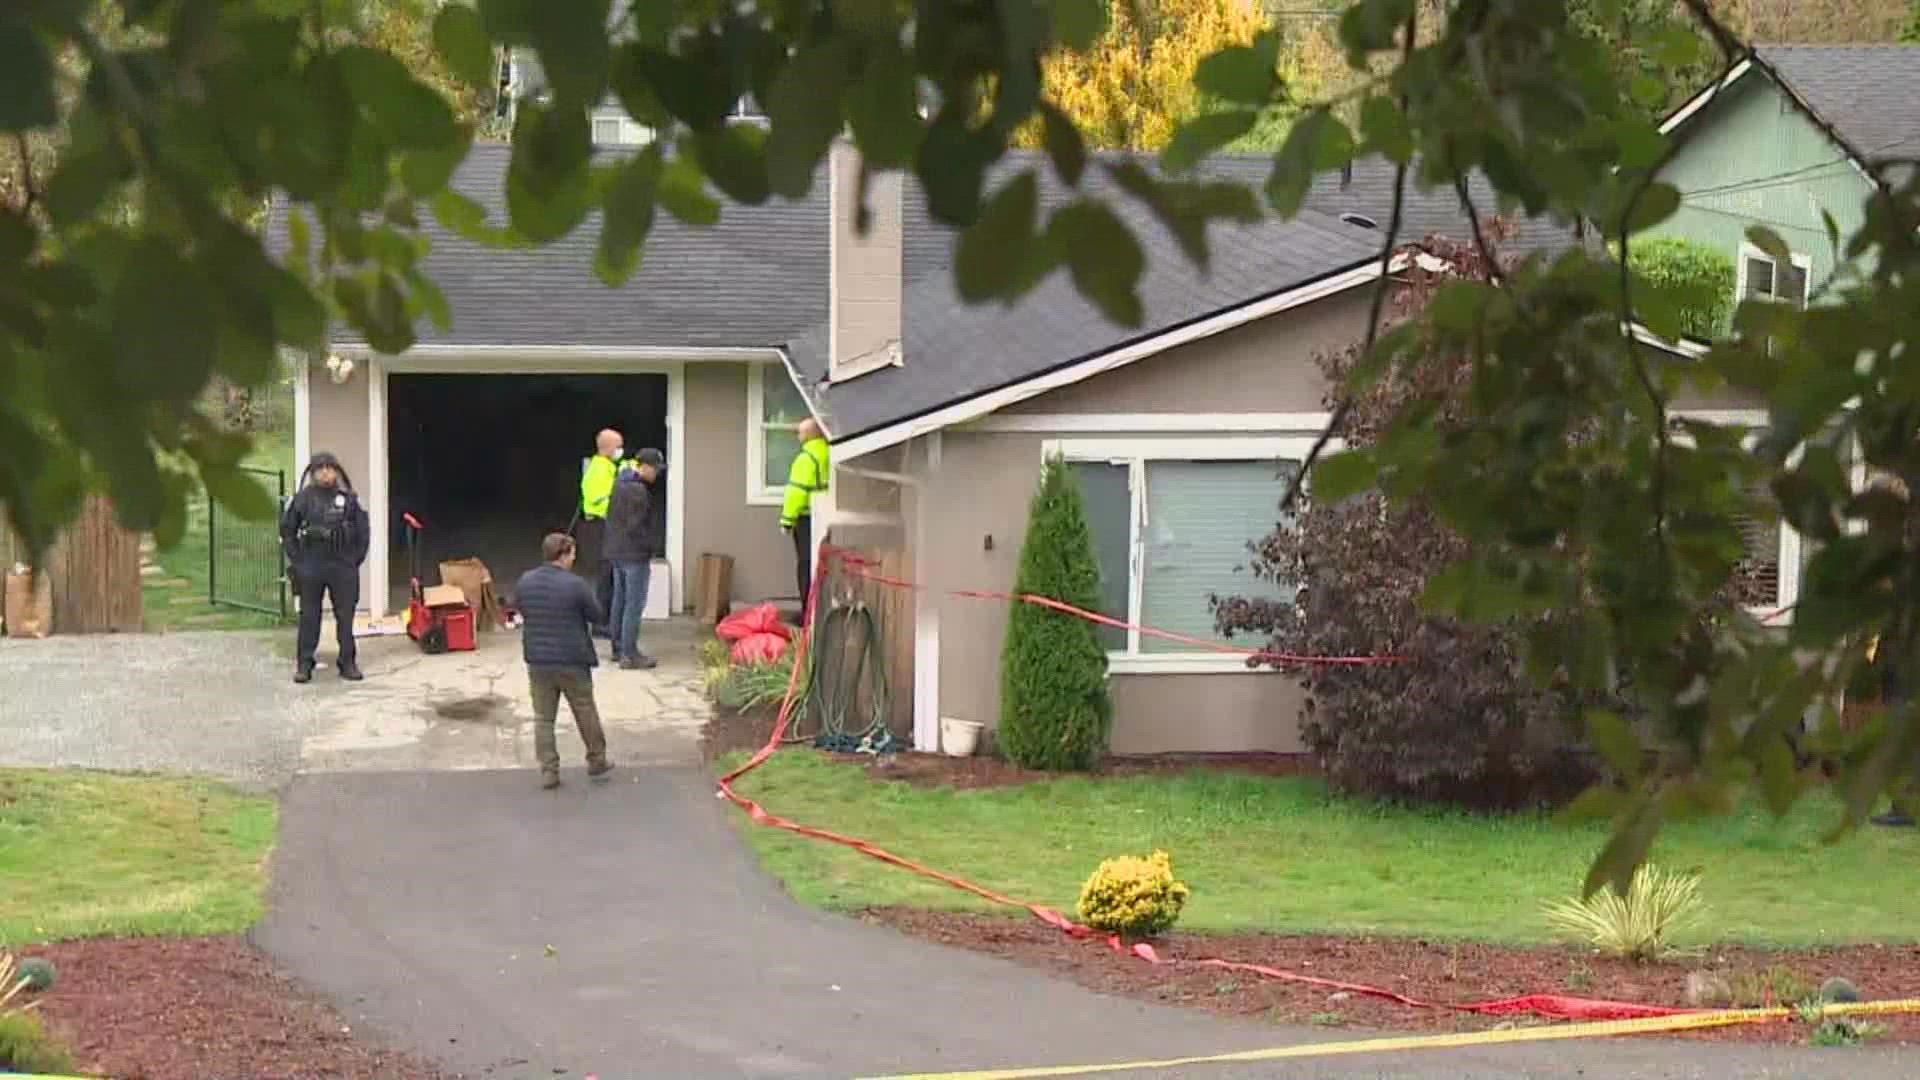 Homicide detectives are investigating after a man was fatally shot inside a West Seattle home early Thursday morning.